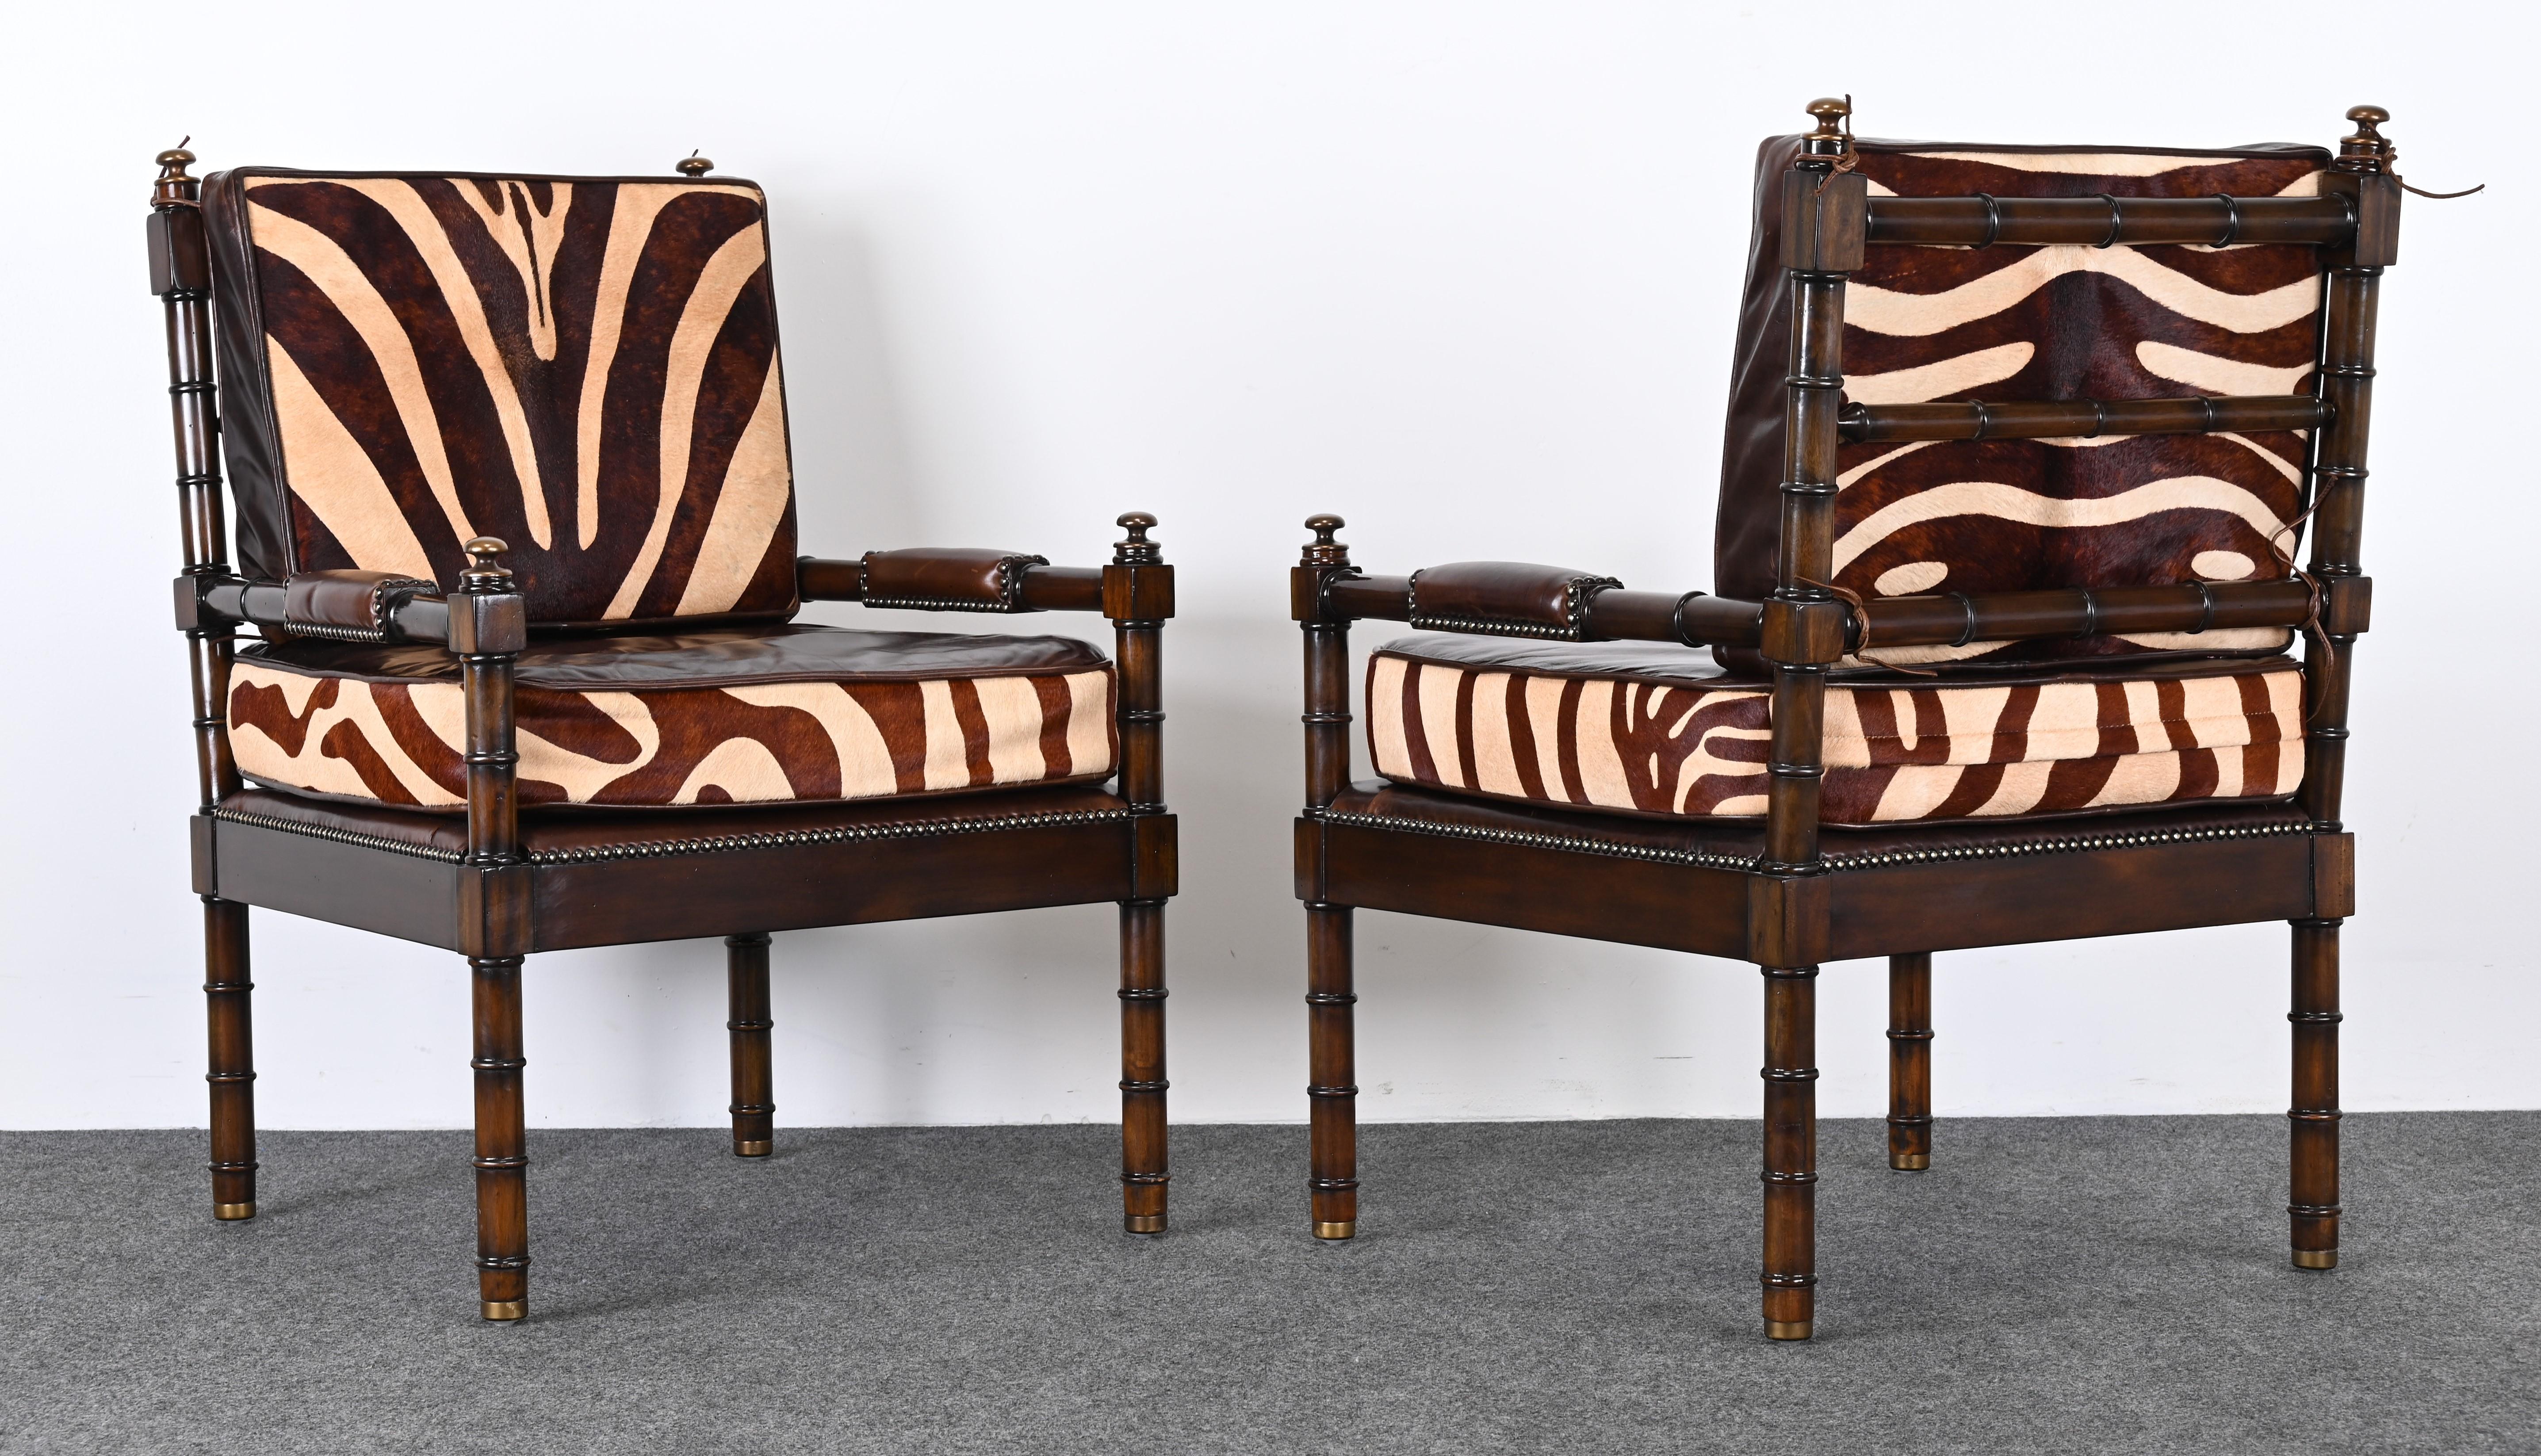 A magnificent pair of faux bamboo mahogany armchairs with leather and cowhide zebra print fabric. The chairs are accented with brass finials and rawhide detail. These chairs would work well in any traditional or contemporary setting with just a